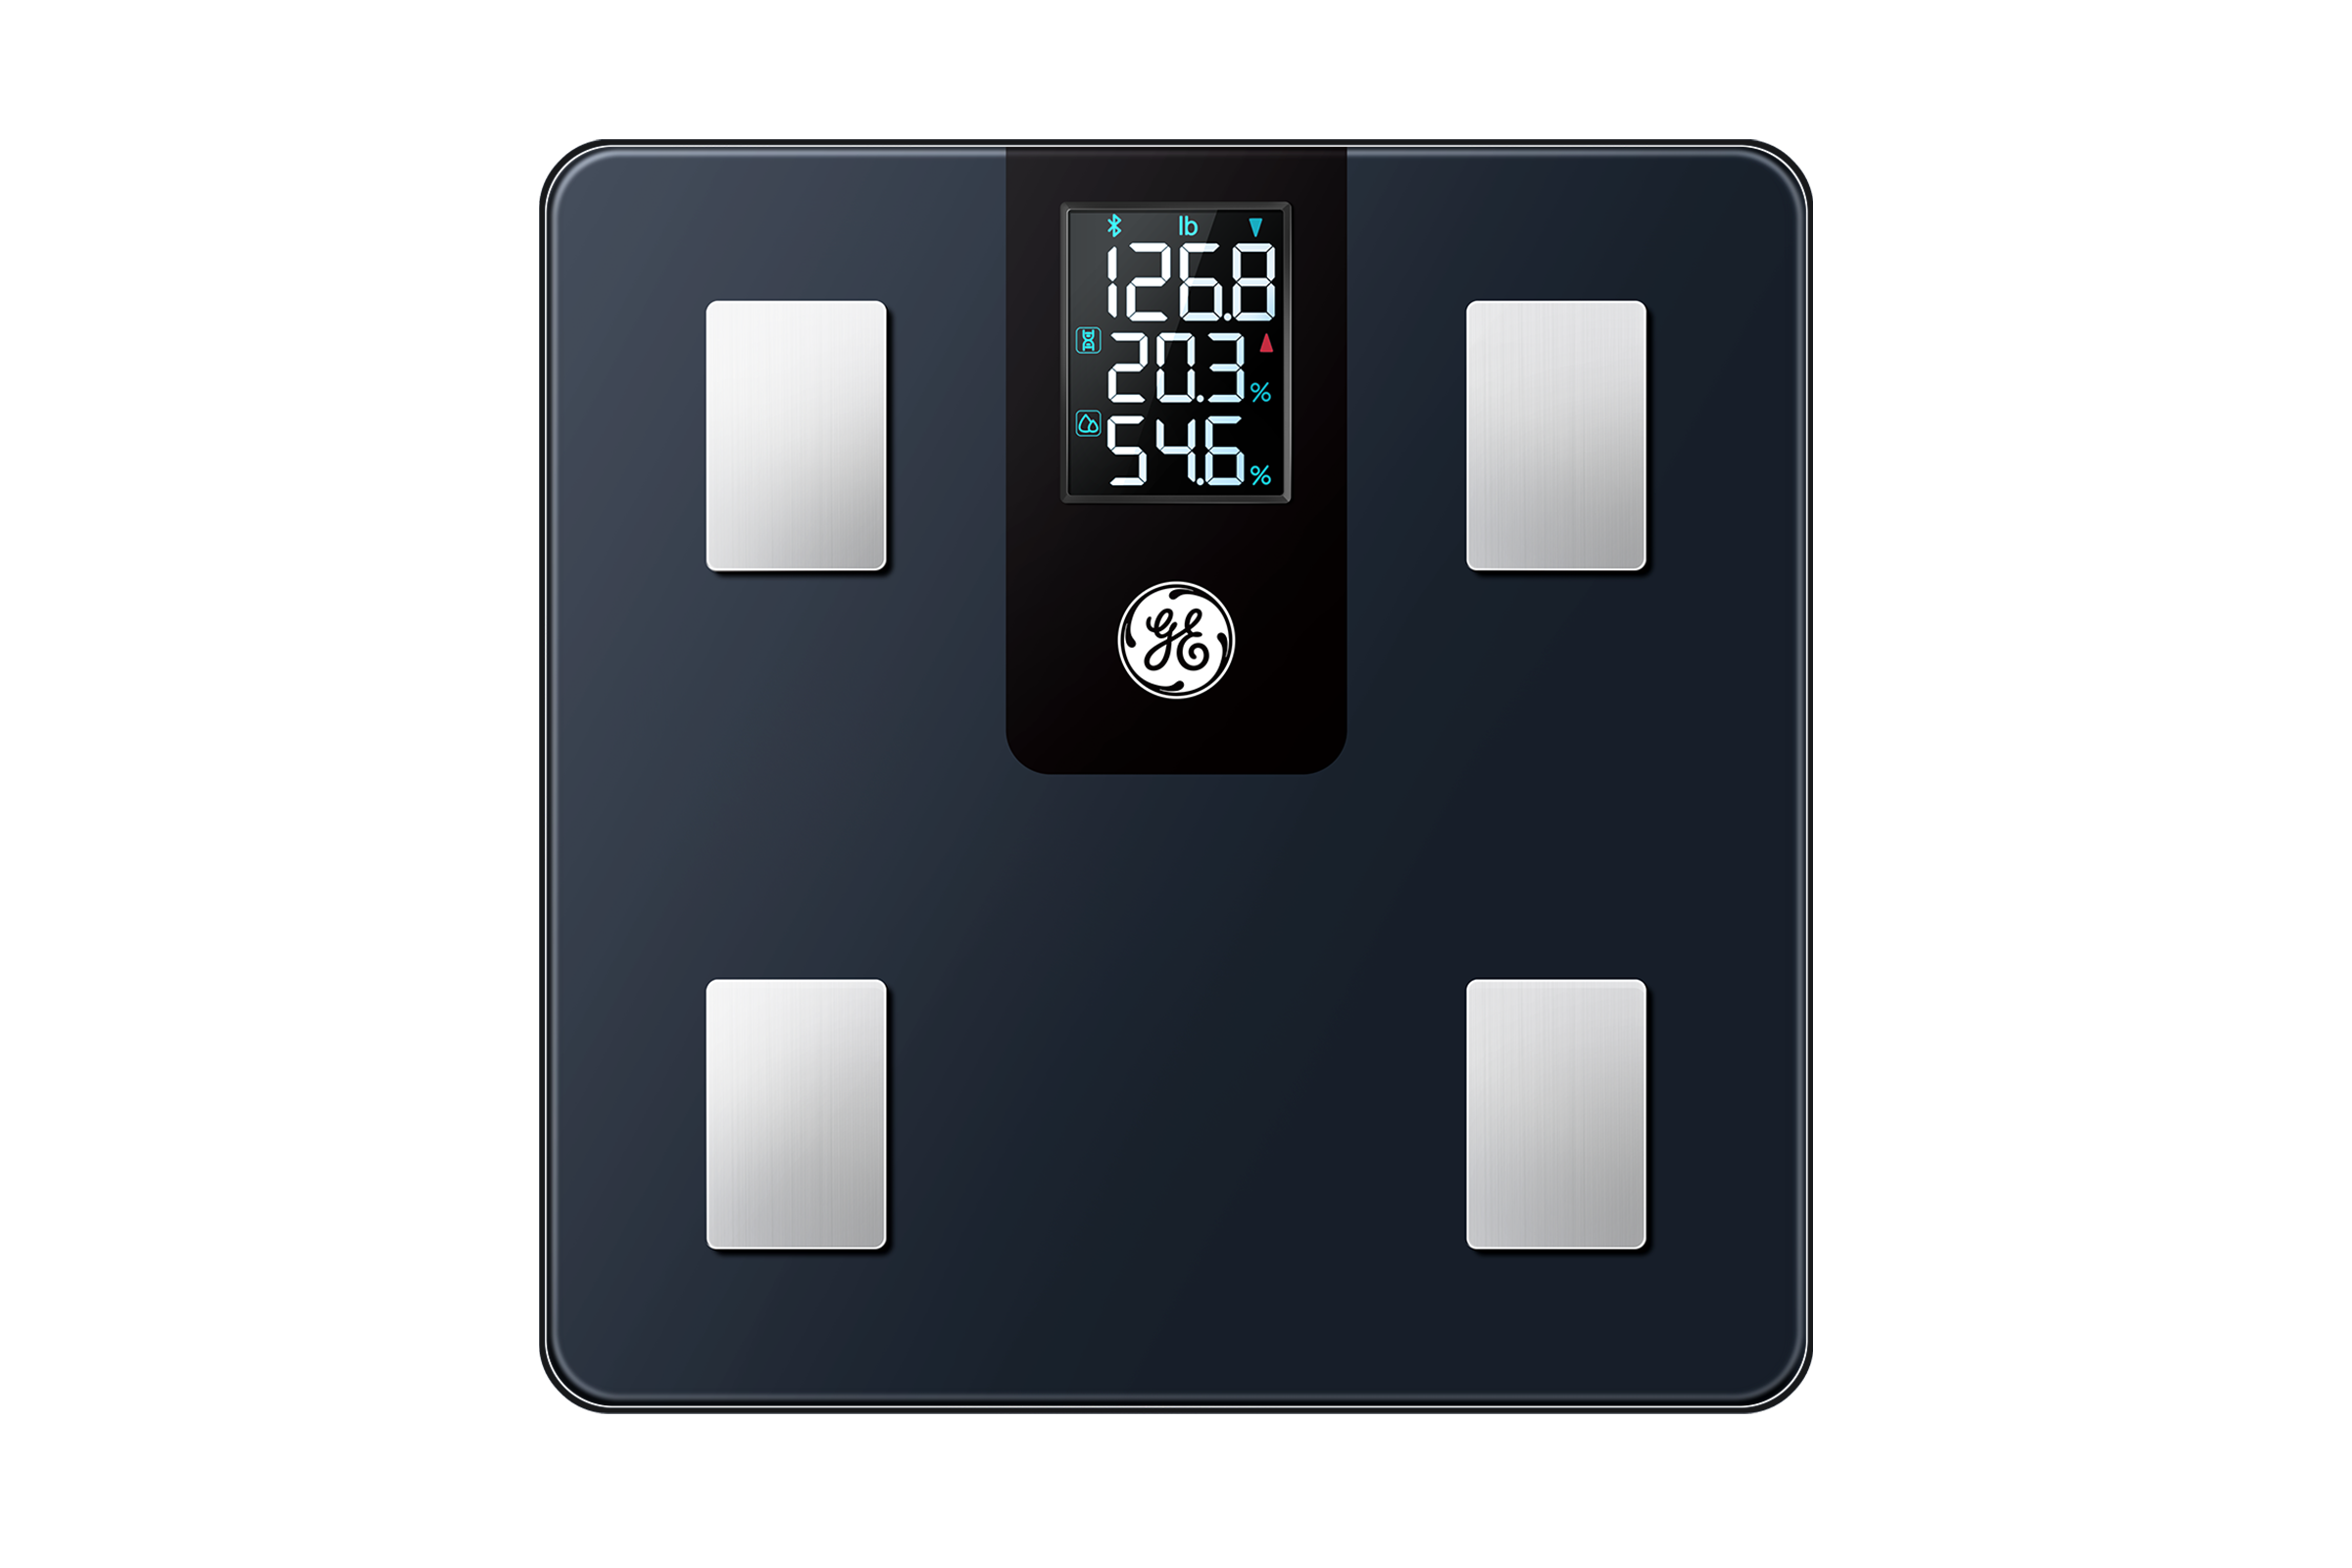 GE Smart Scale for Body Weight and Fat Percentage with All-in-one